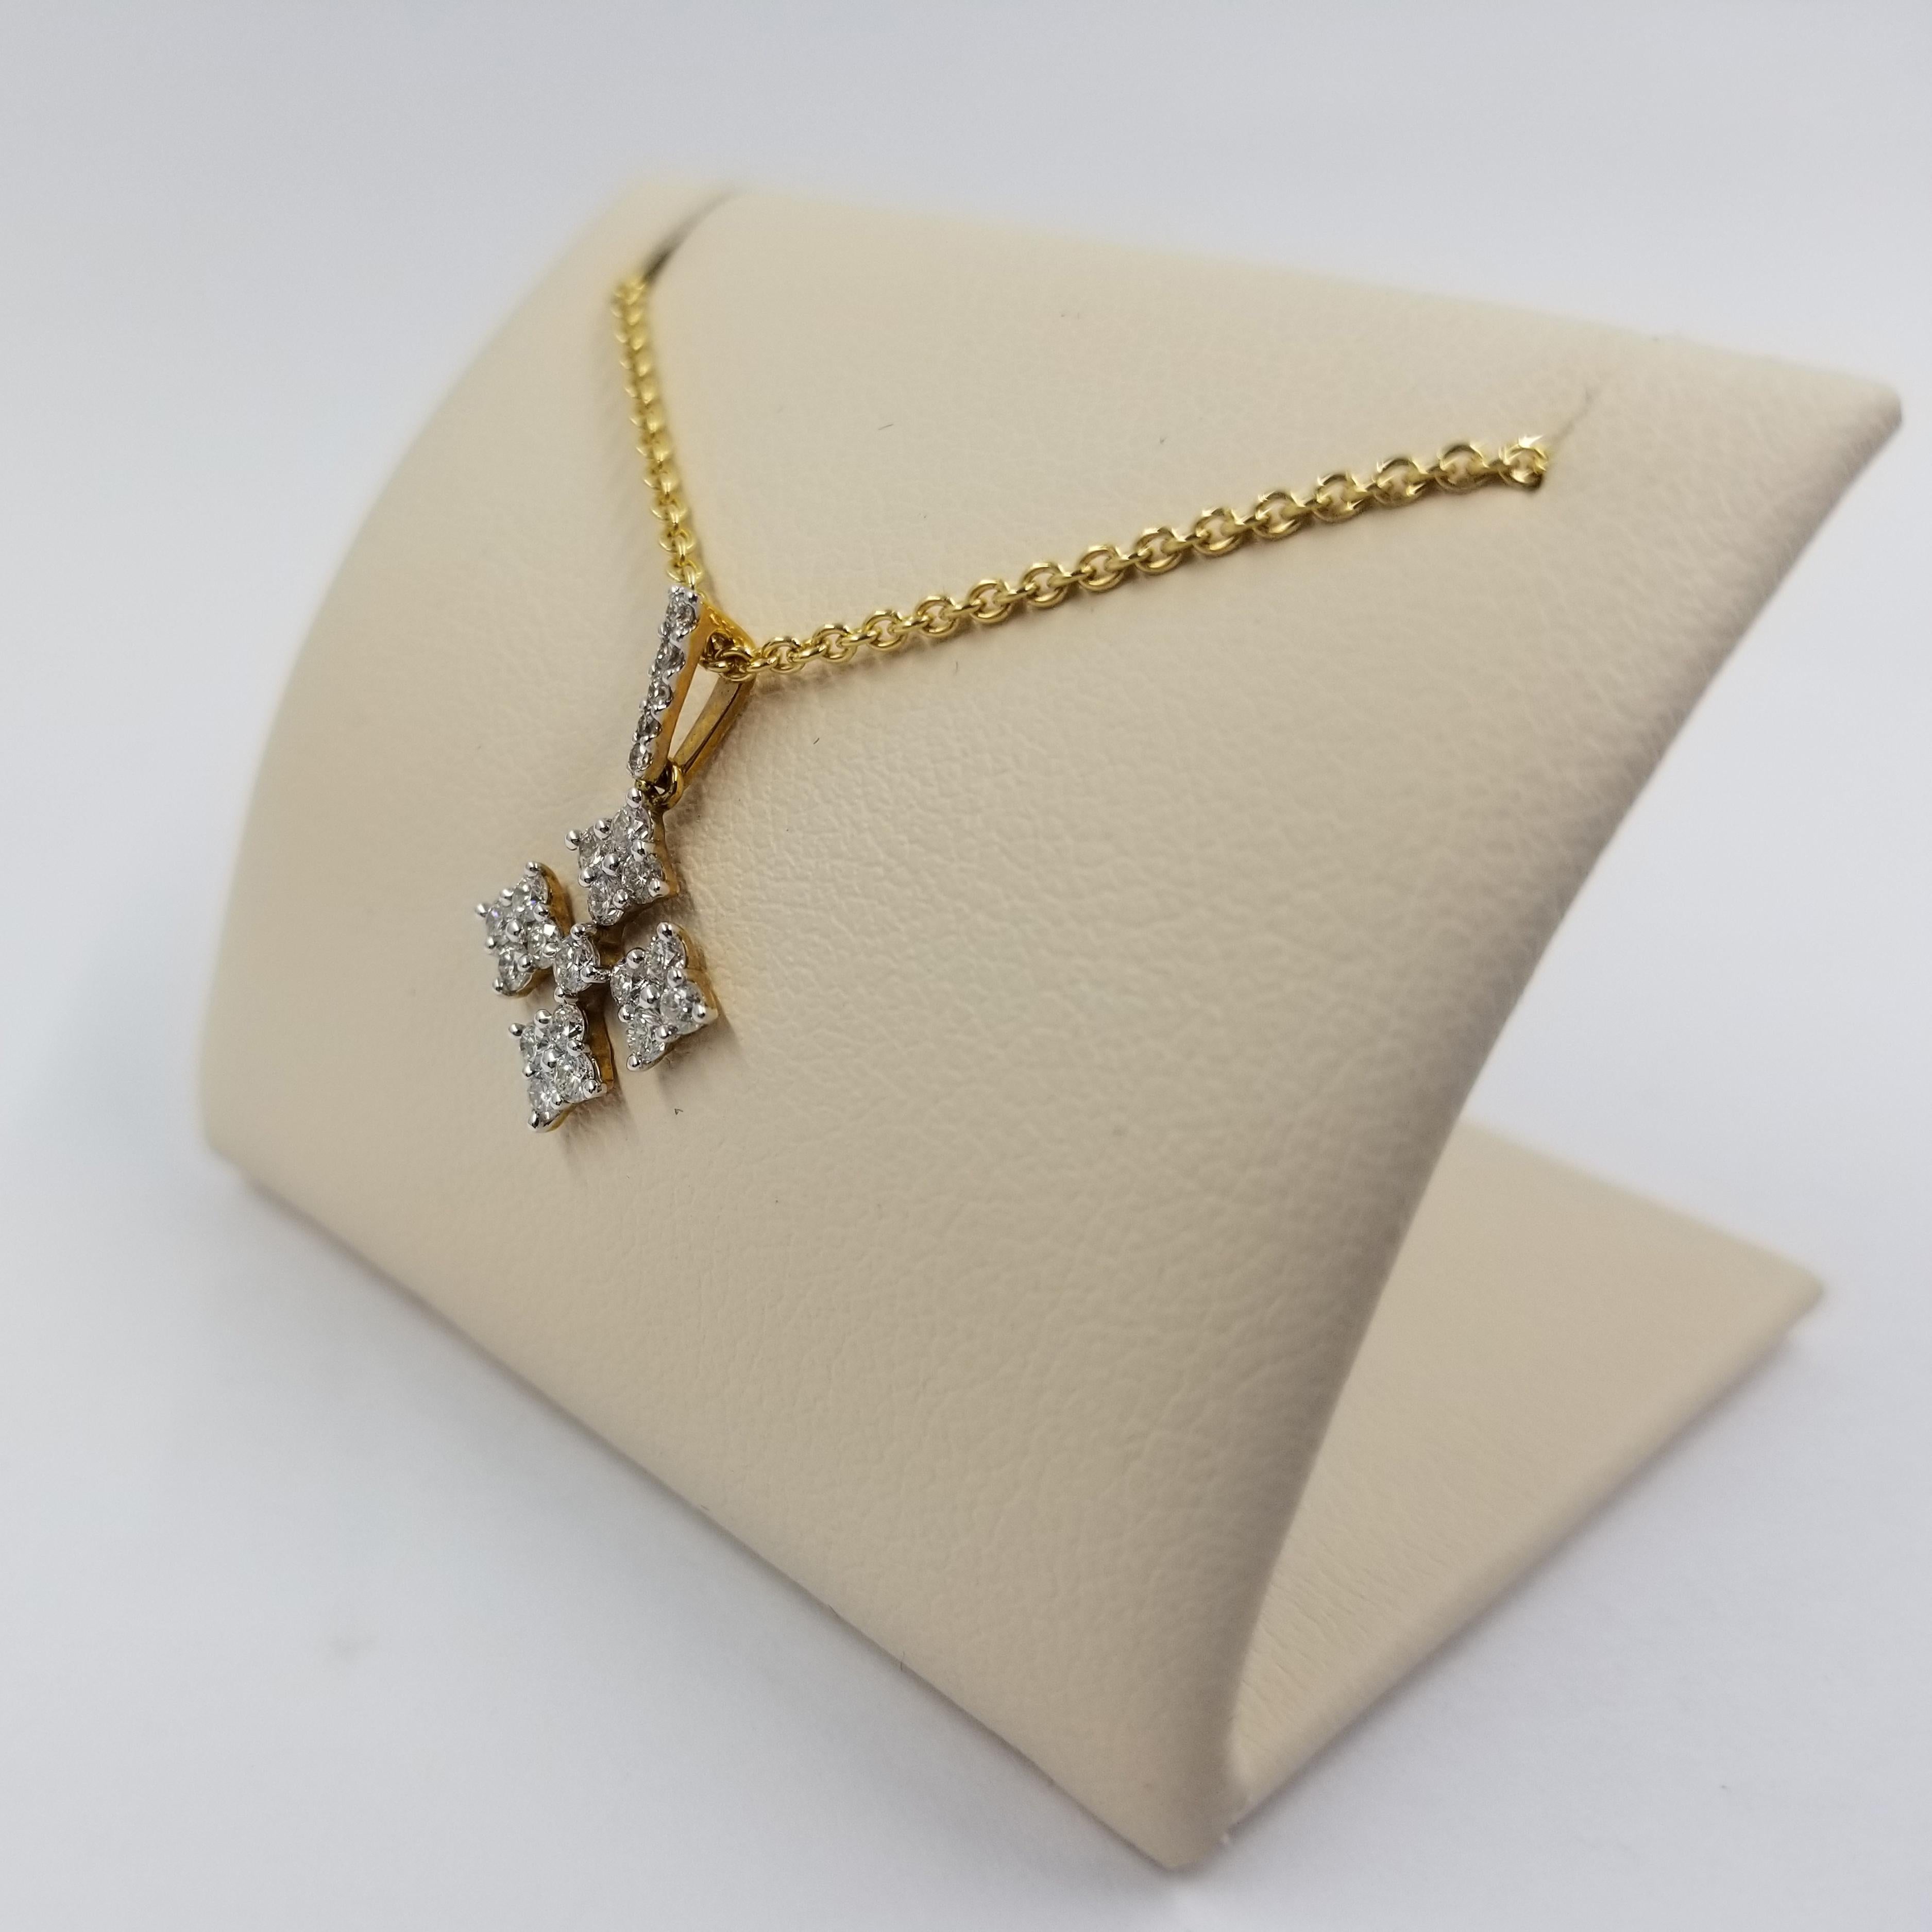 18 Karat Yellow Gold Pendant on a 16 inch Rolo chain with Lobster clasp. 22 Prong-set Round Brilliant Diamonds of SI Clarity & G Color Total Exactly 0.36 carat total weight with diamond bale.